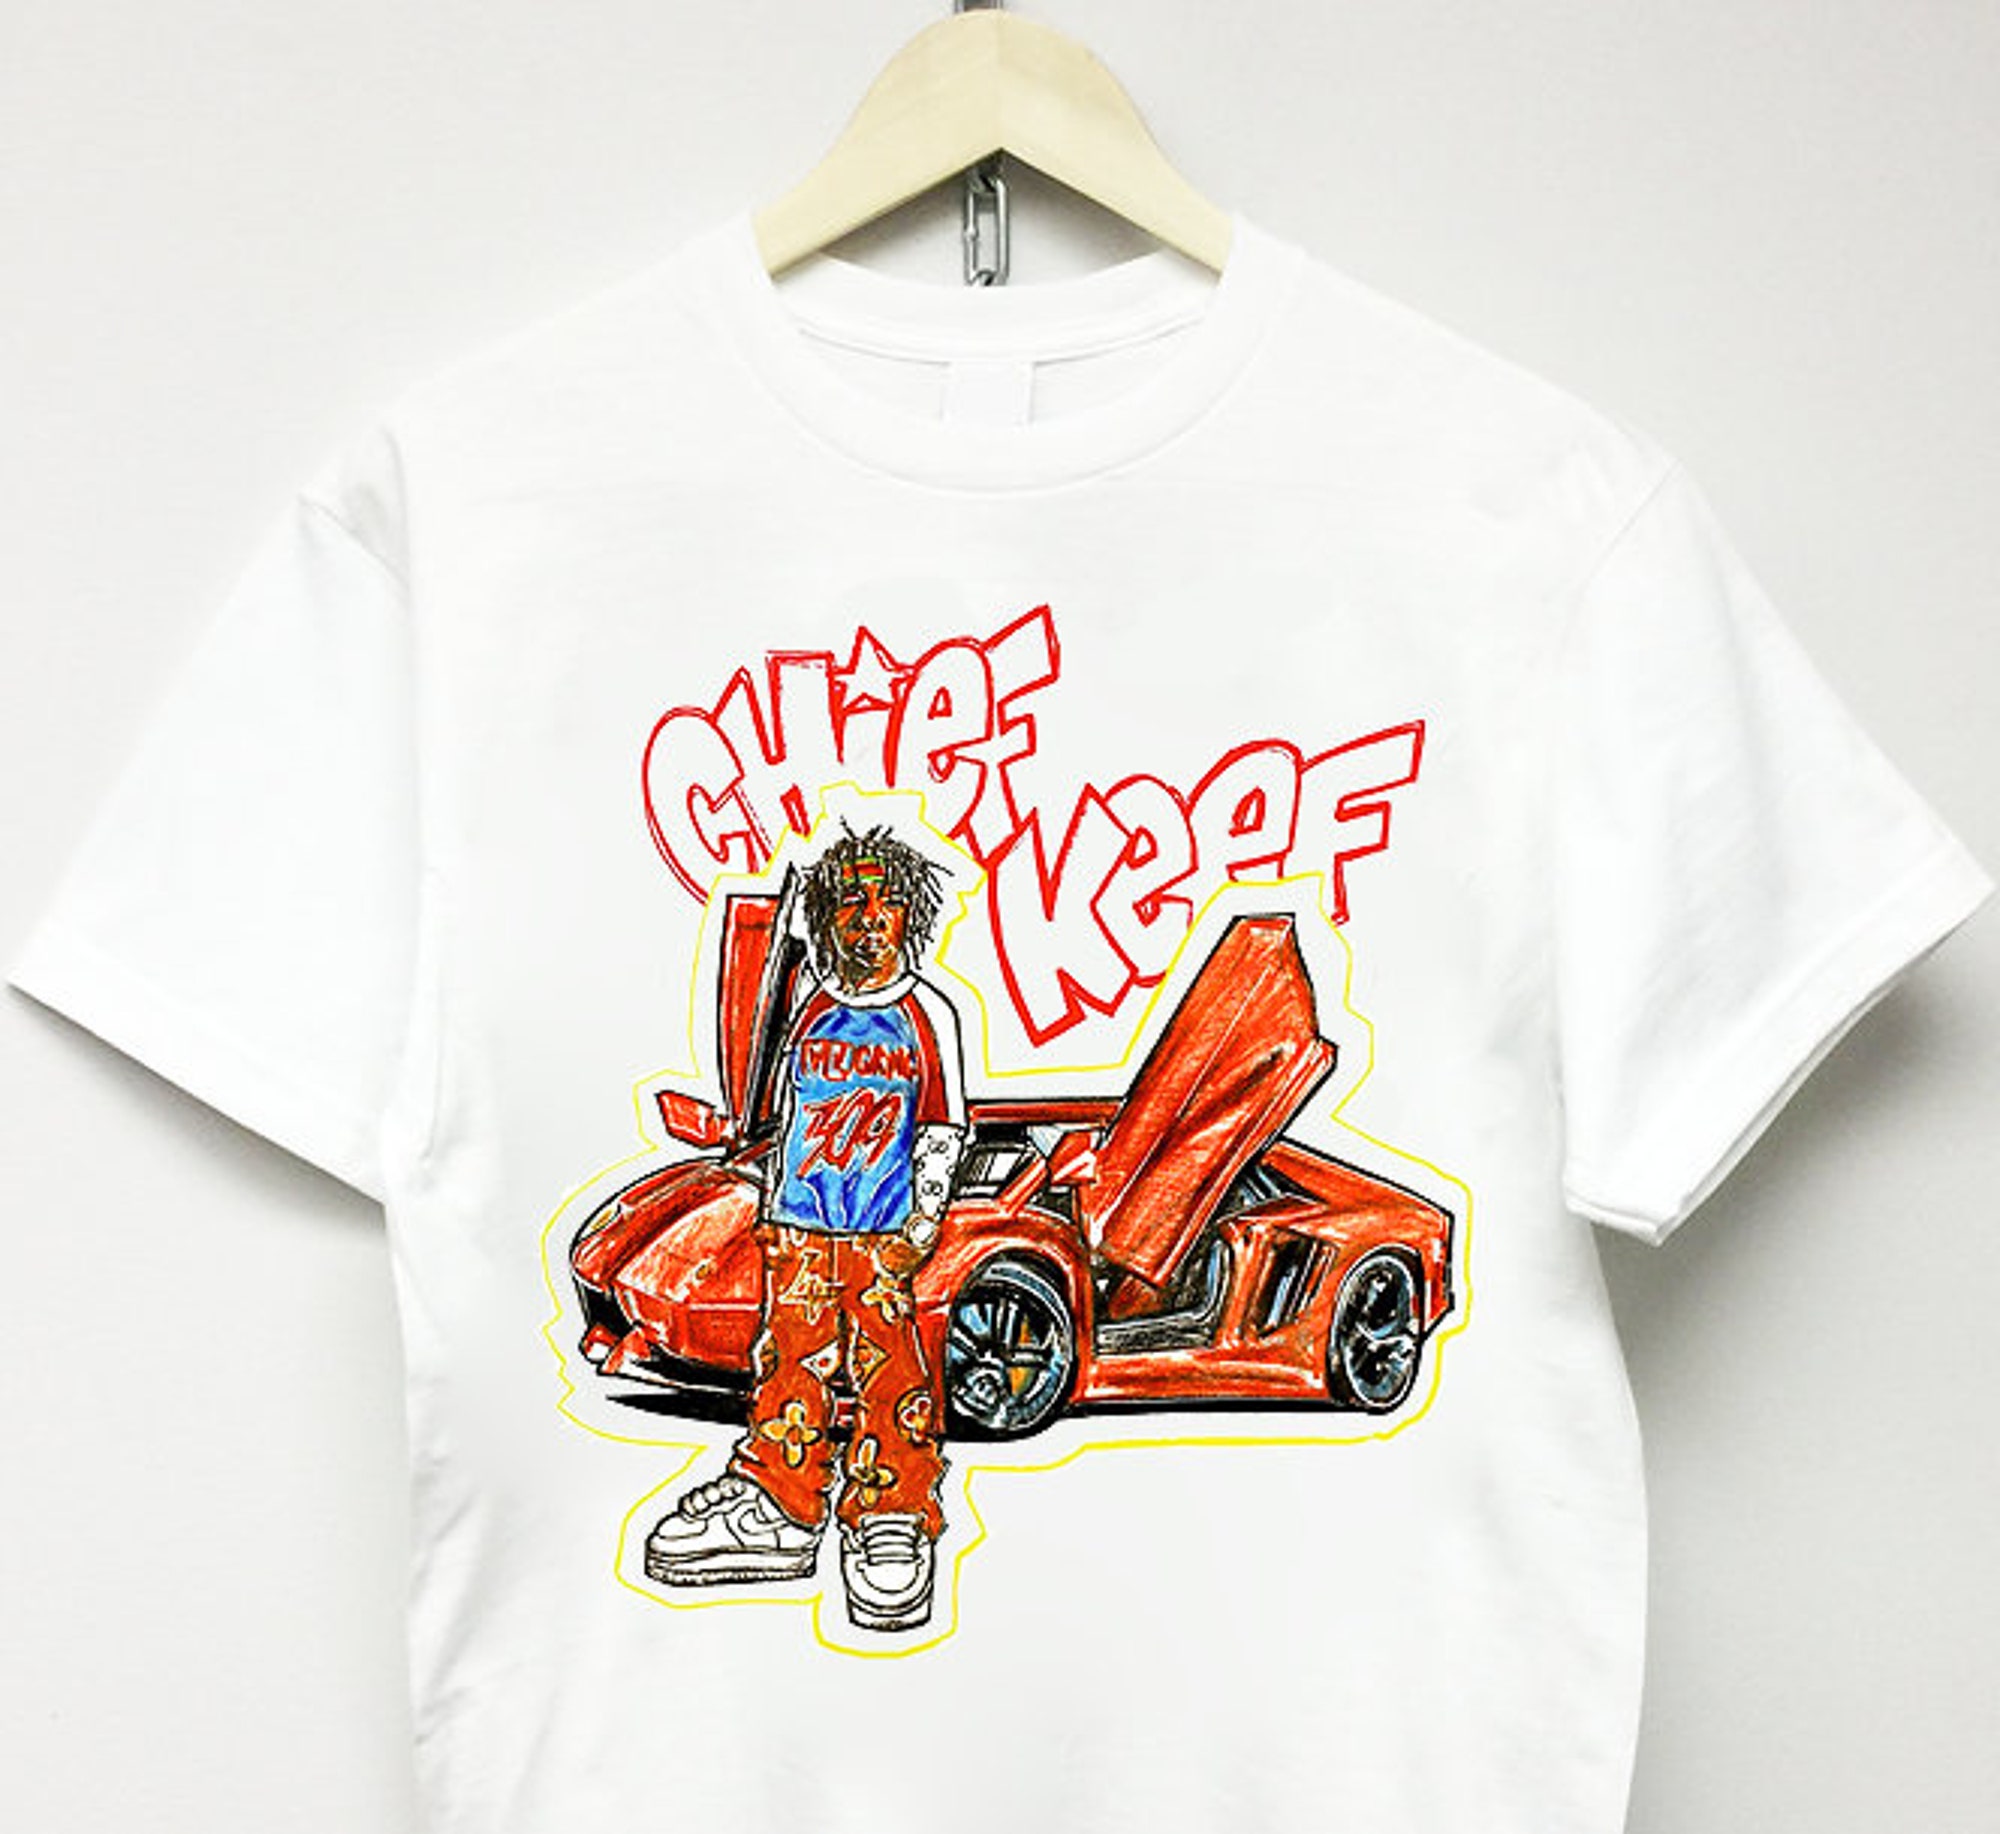 CHIEF KEEF T-SHIRT